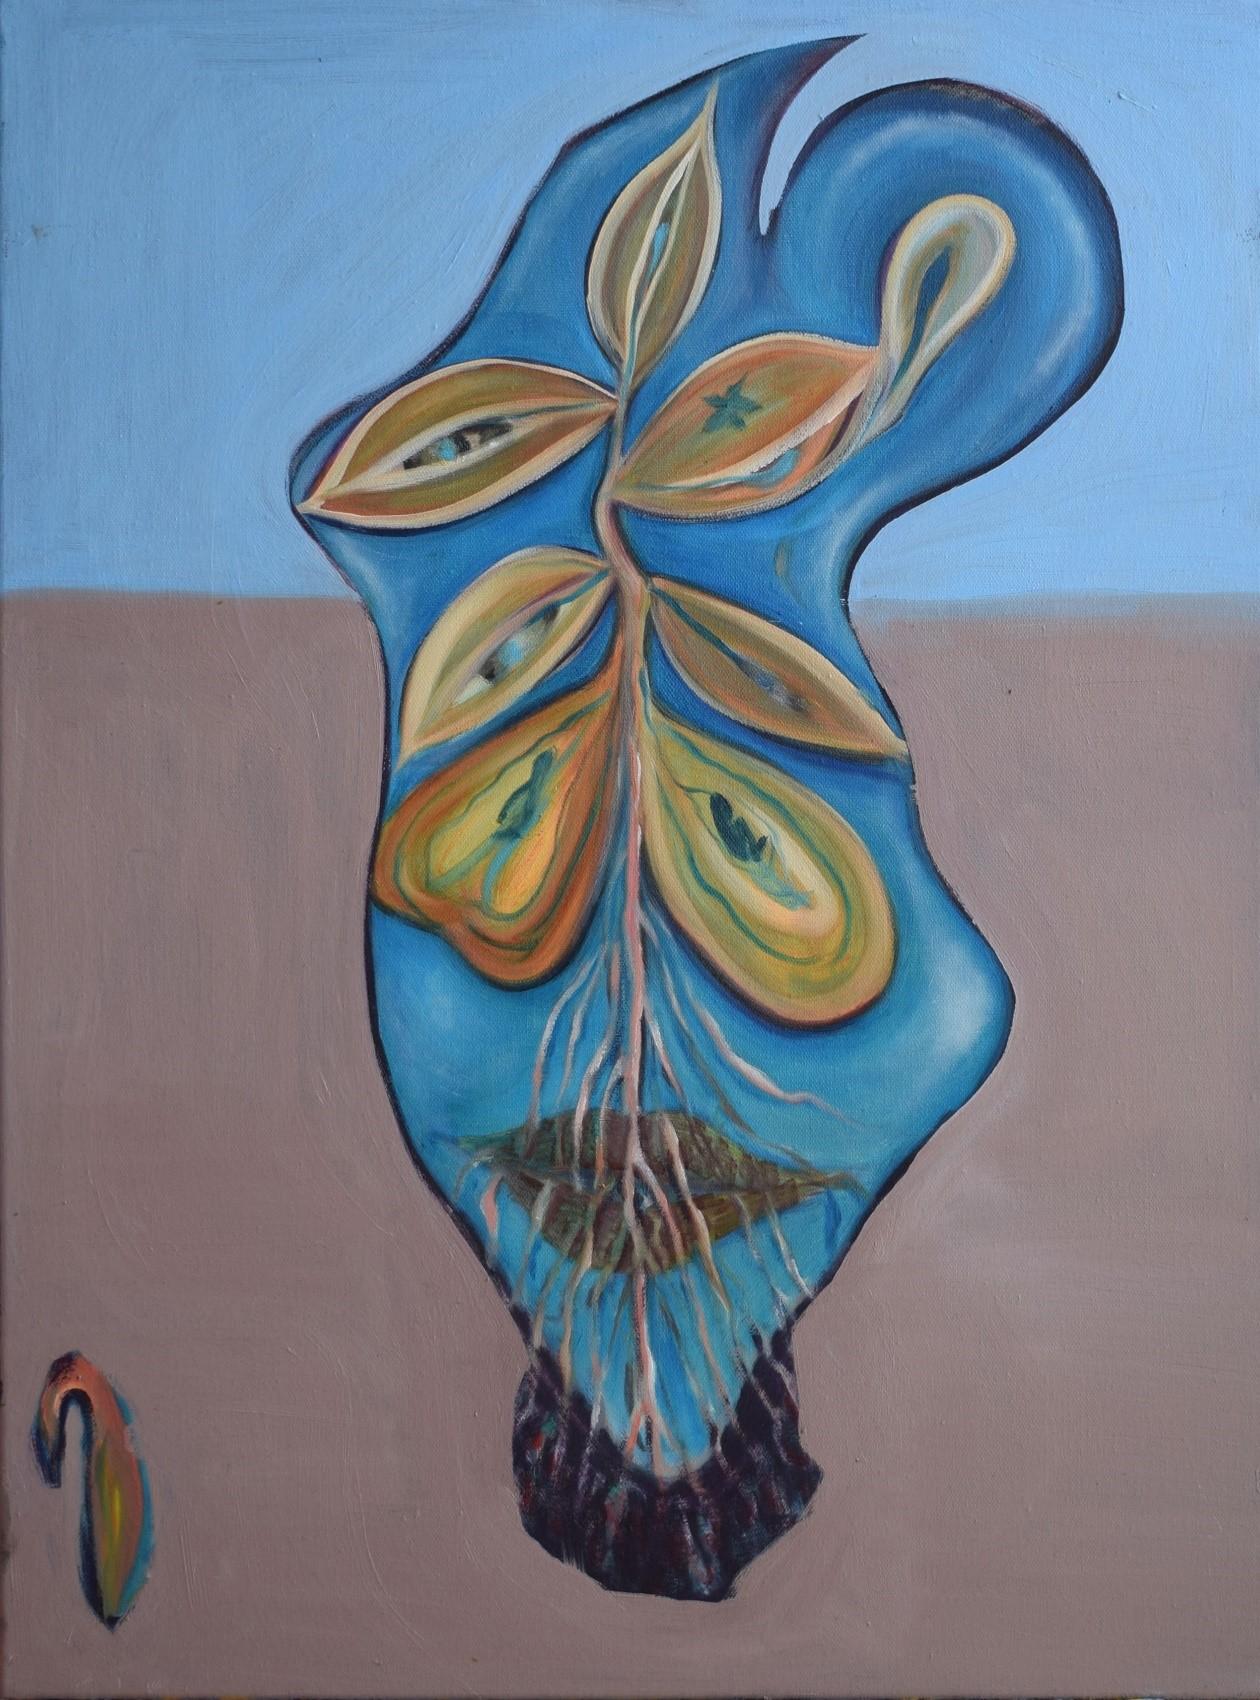 Oil on canvas

I always think about the similarity of both people and plants. I especially like to appreciate flowers, see their petals, their stamens and the stigma and anther within. Taking root from the mouth, in line with the customs from